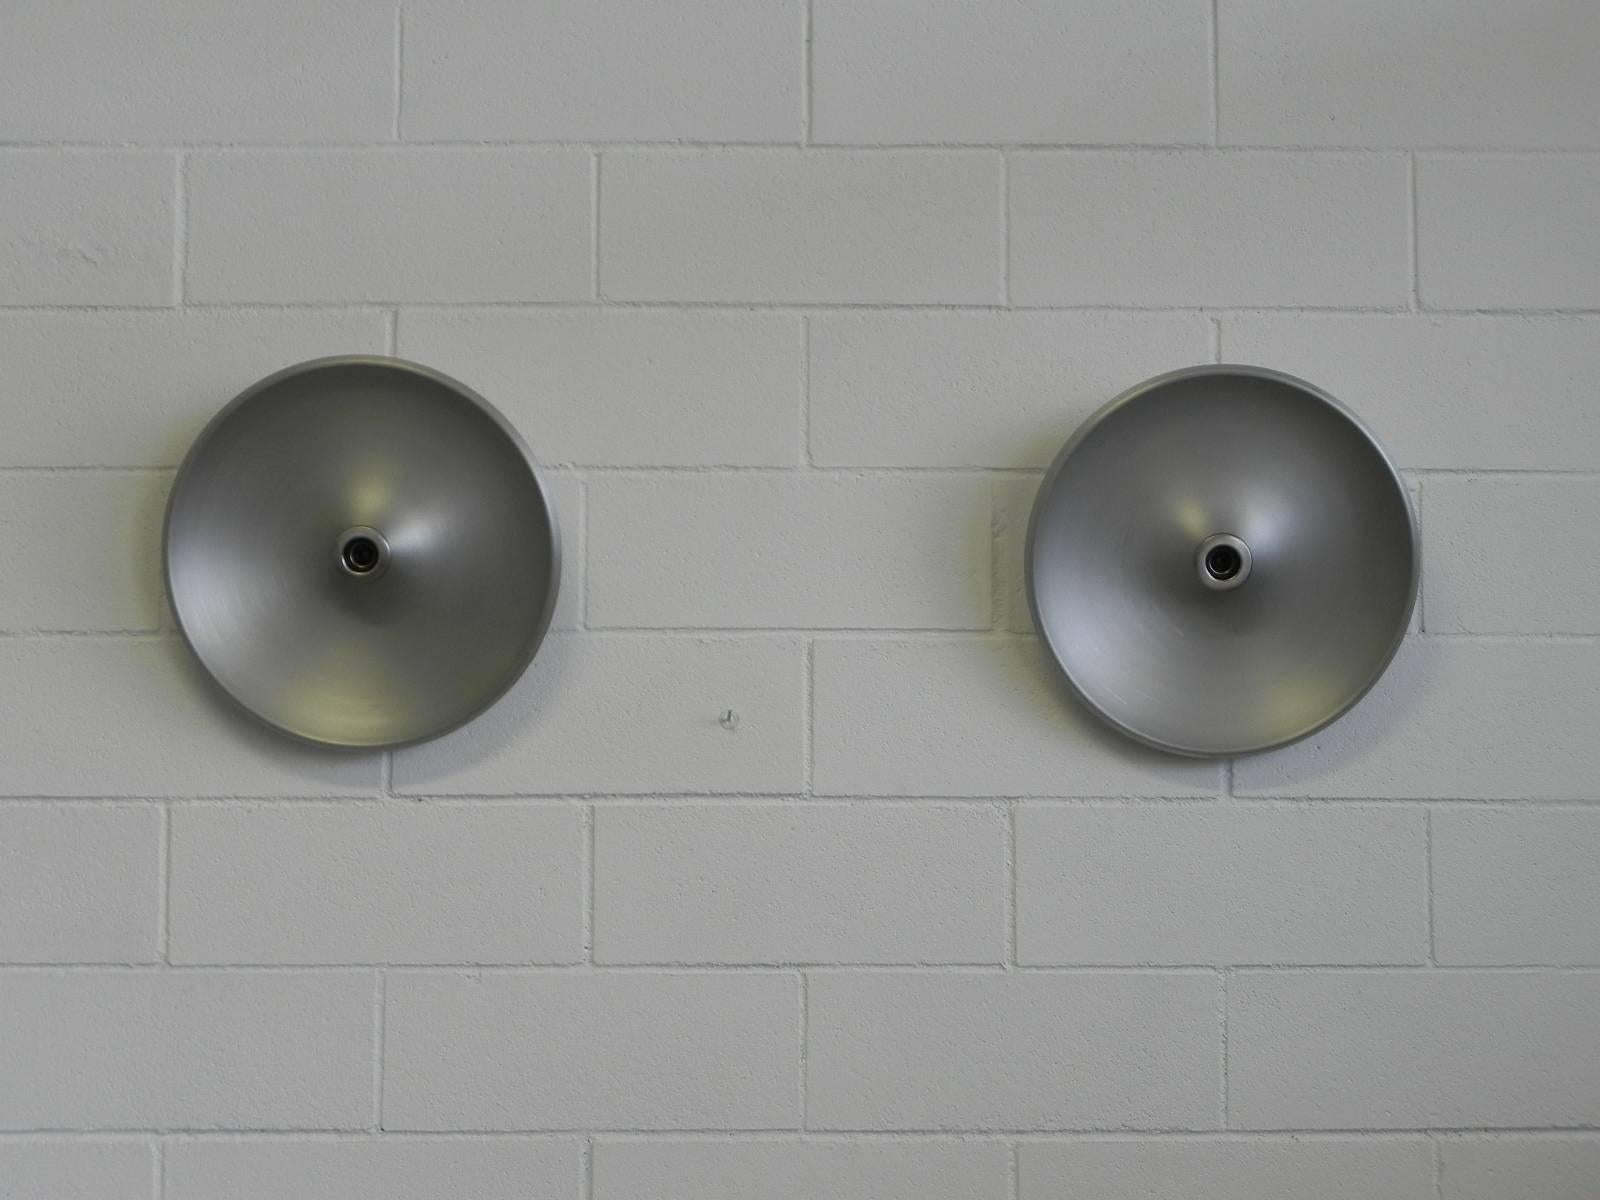 Ultra rare pair of wall lamps designed by Gino Sarfatti for Arteluce, Italy, 1971. This is for Mod.No. 262 in aluminum.